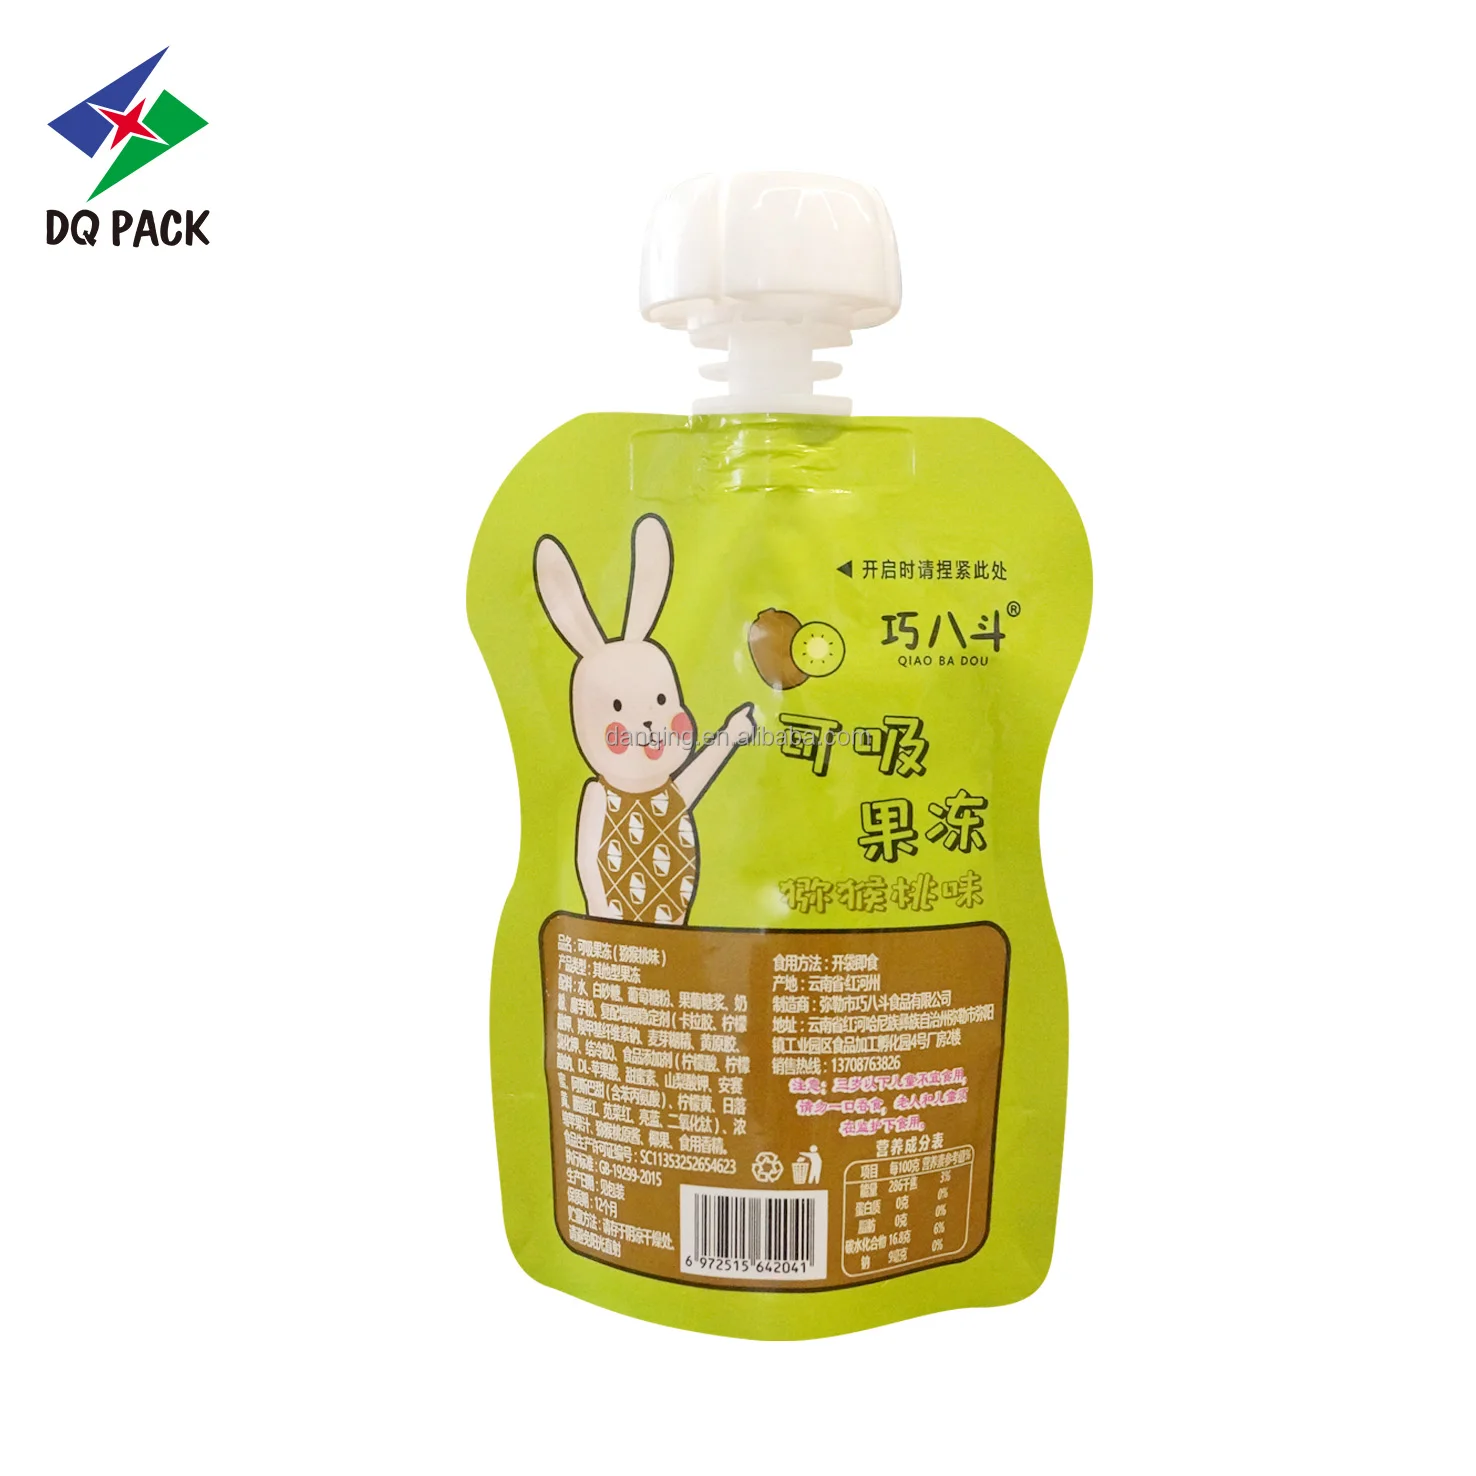 DQ PACK Custom Printing Recyclable Laminated Material Baby Food Spout Pouch